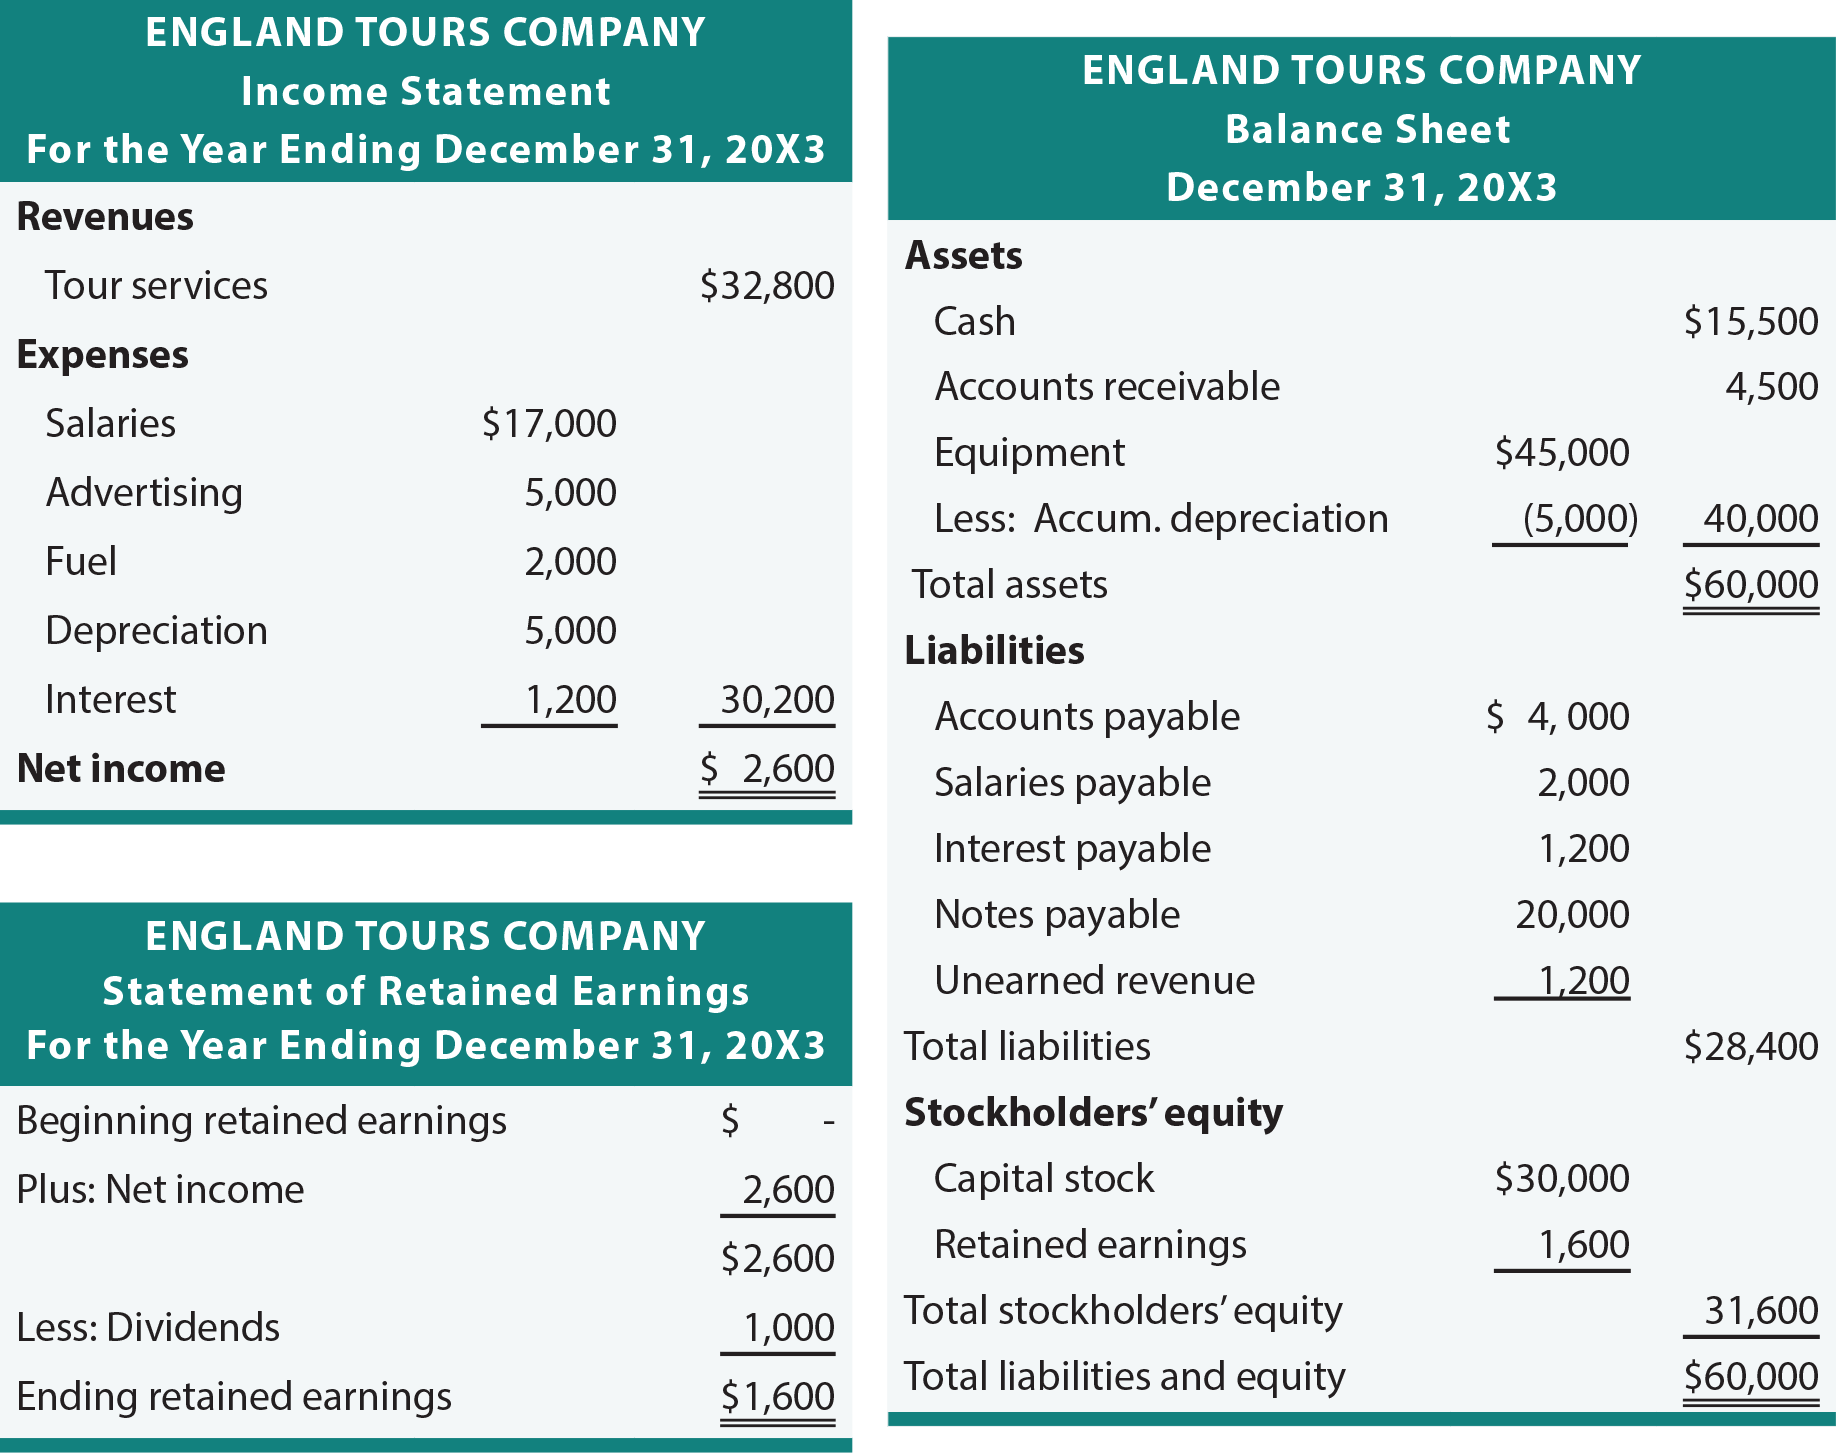 England Tours Income Statement and Balance Sheet